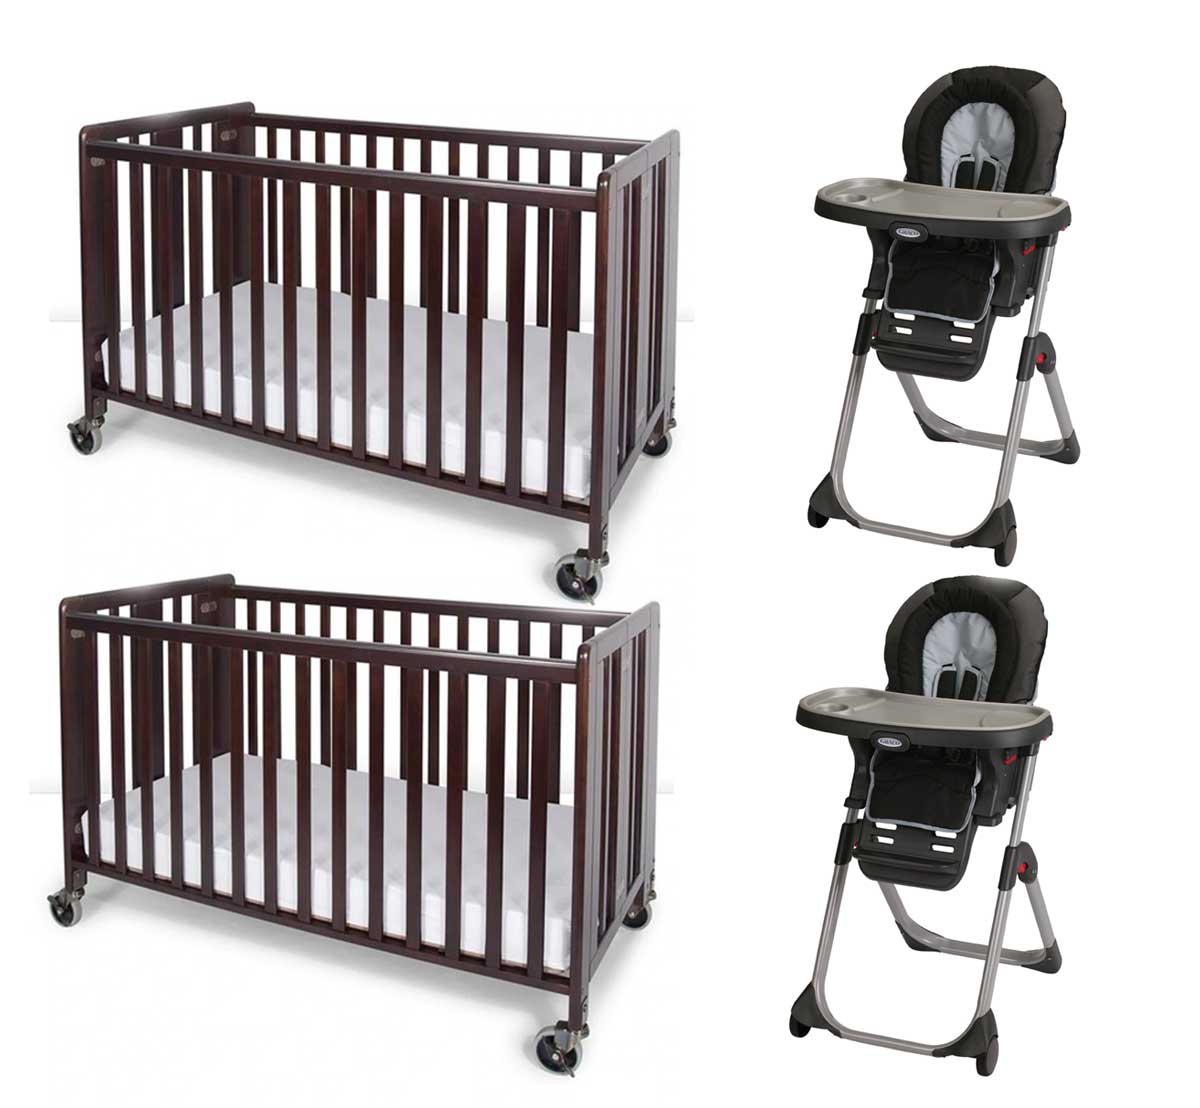 PACKAGE 21 ( 2 FULL CRIBS + 2 HIGH CHAIRS)